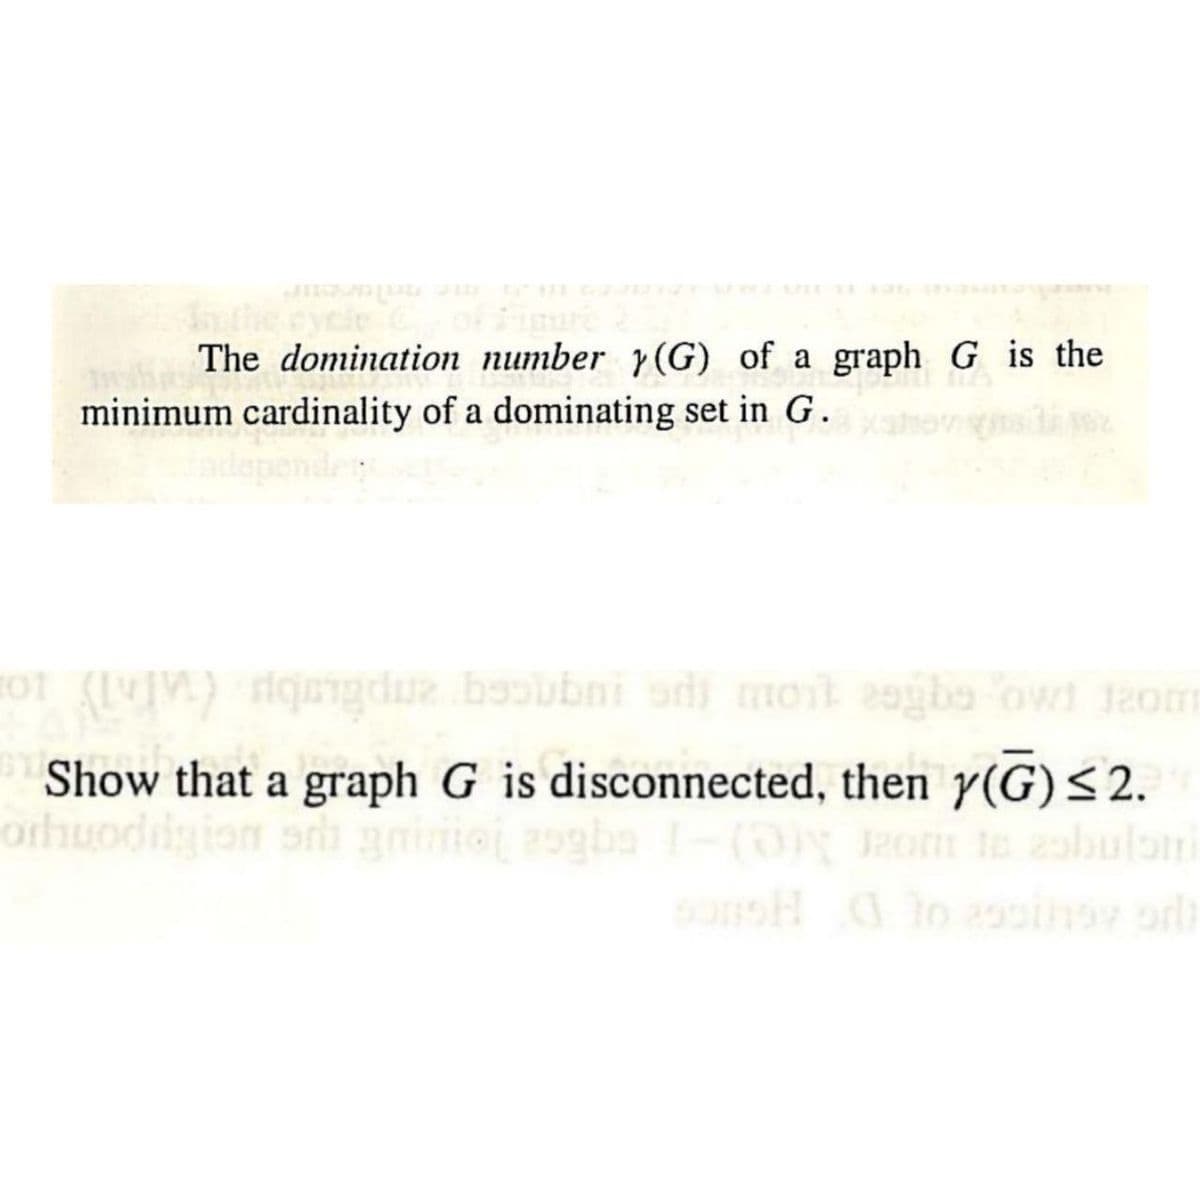 The domination number y(G) of a graph G is the
minimum cardinality of a dominating set in G.
101 ([V]V) siquigduz besubni oni mort esgbs owi 120om
Show that a graph G is disconnected, then y(G) ≤ 2.
orhuodigion srb gminioj asgba